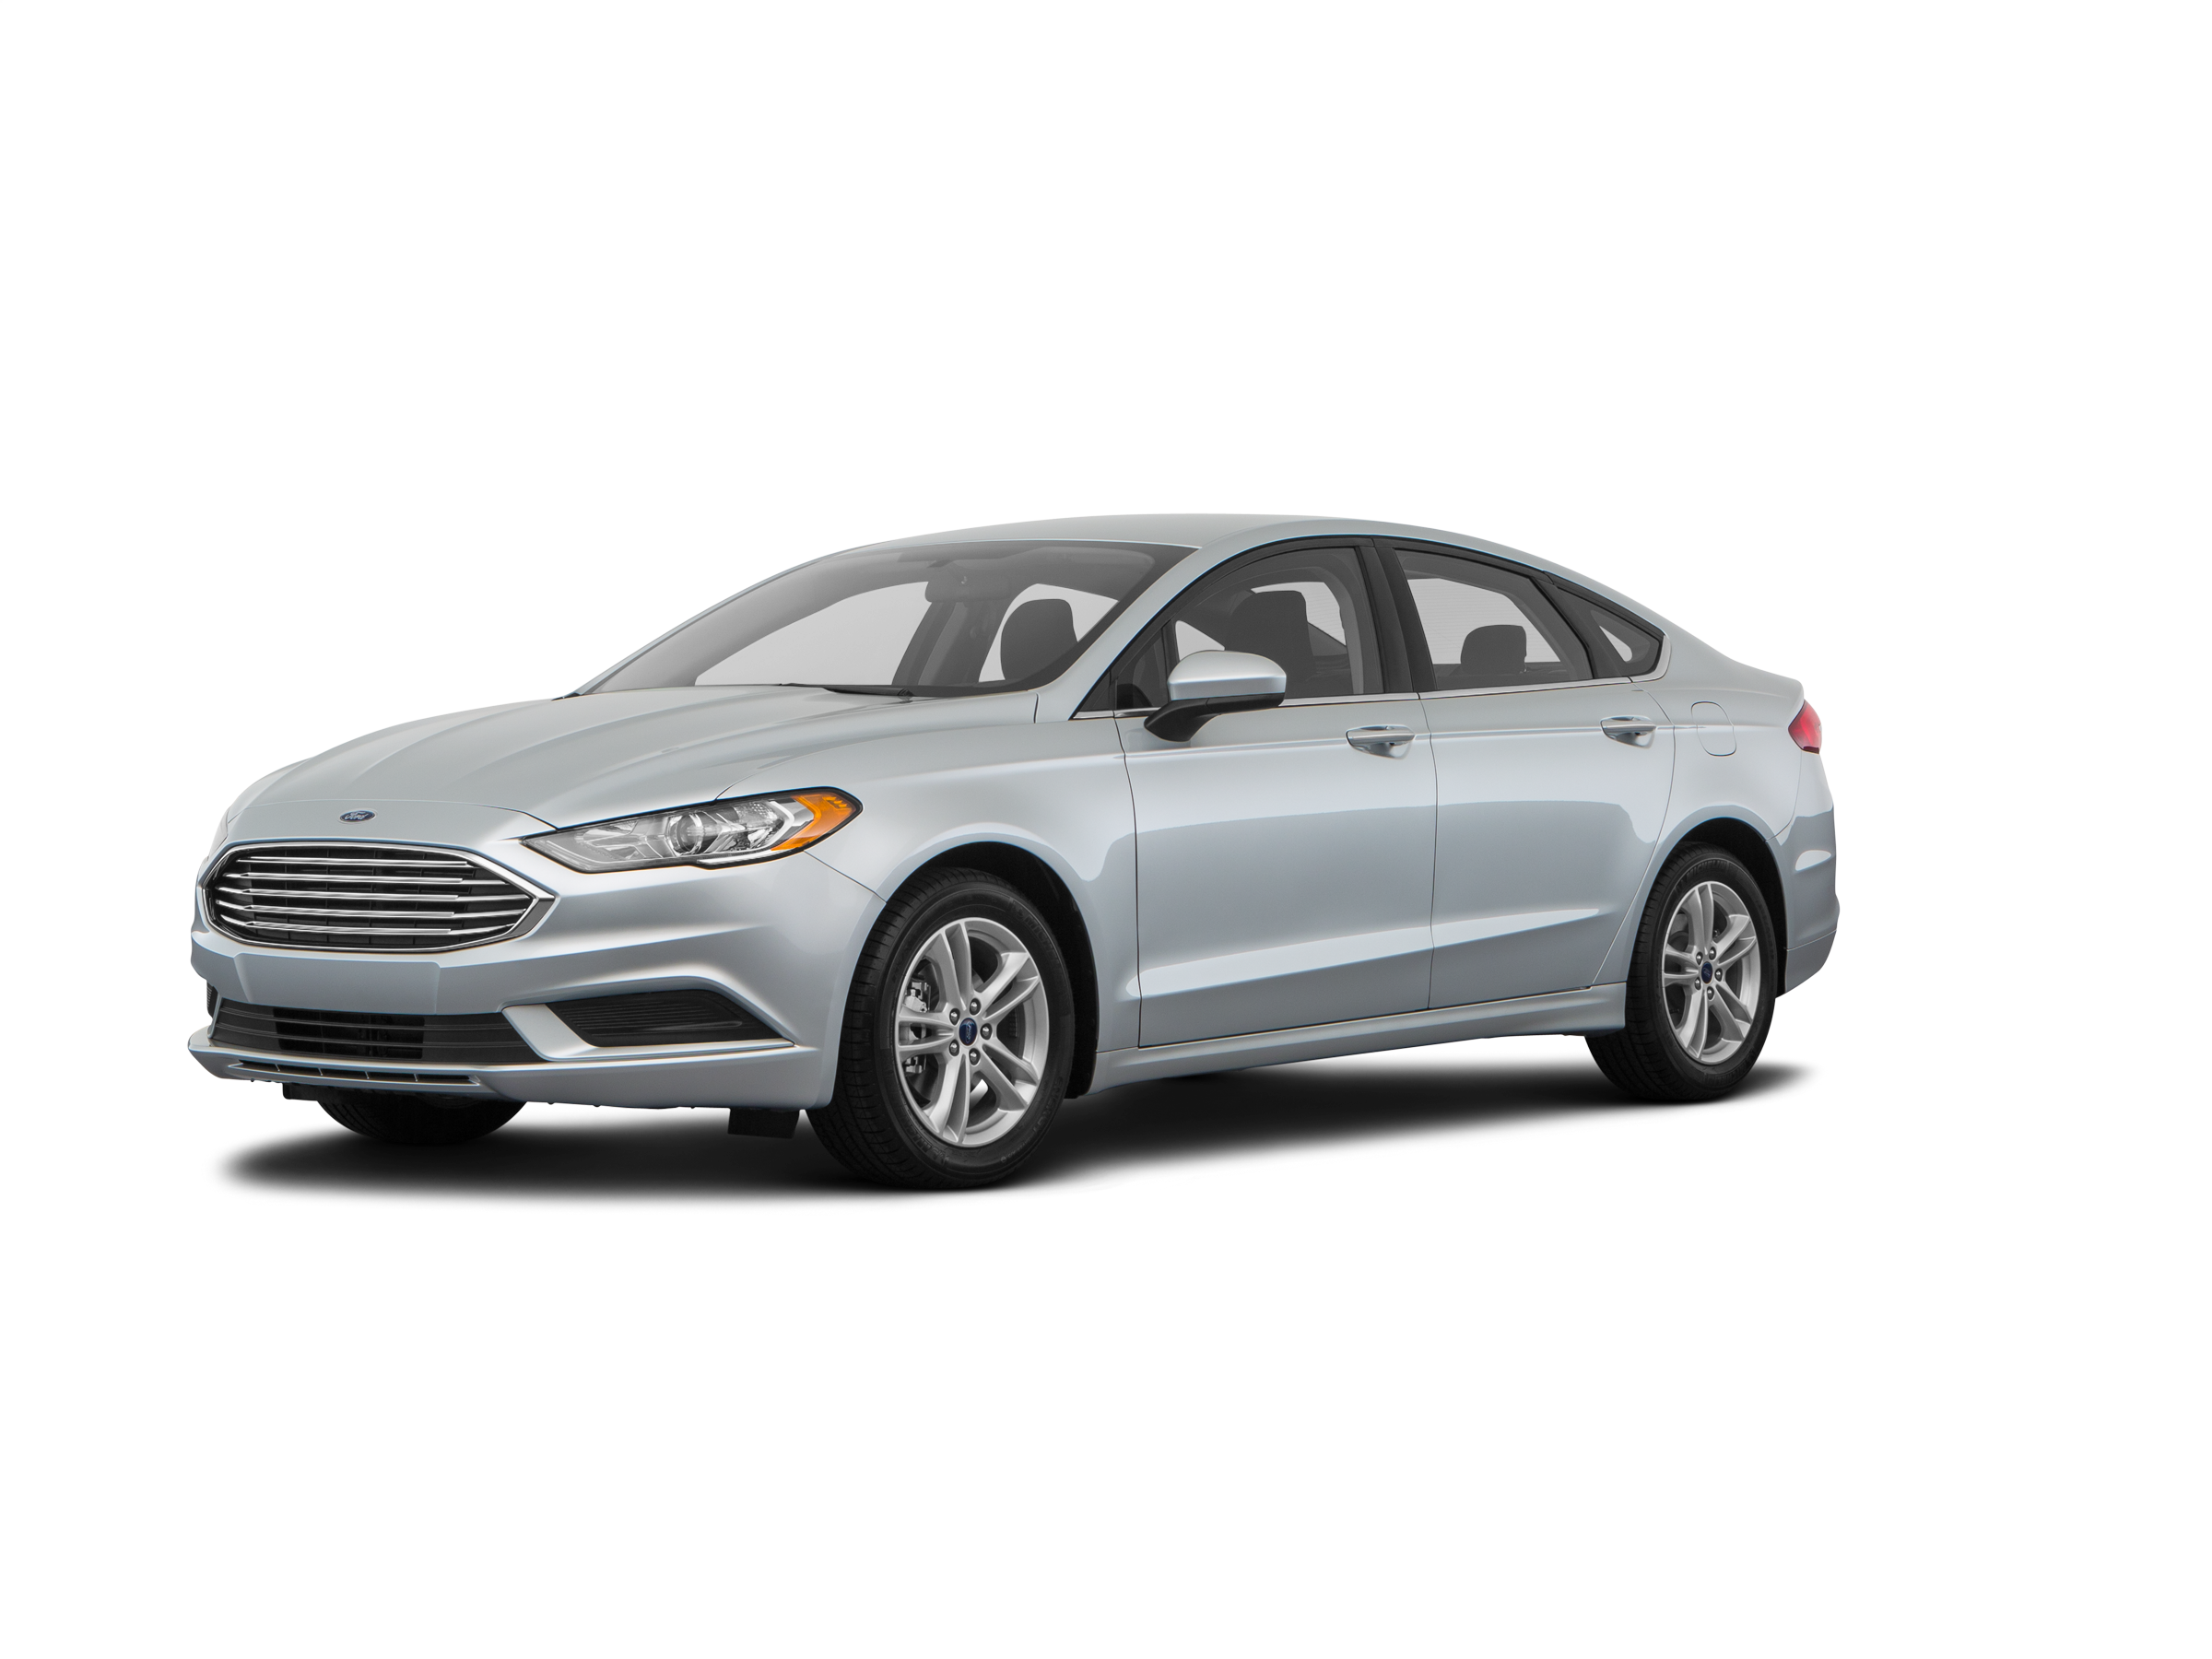 https://file.kelleybluebookimages.com/kbb/base/evox/CP/12239/2018-Ford-Fusion-front_12239_032_2400x1800_UX_nologo.png